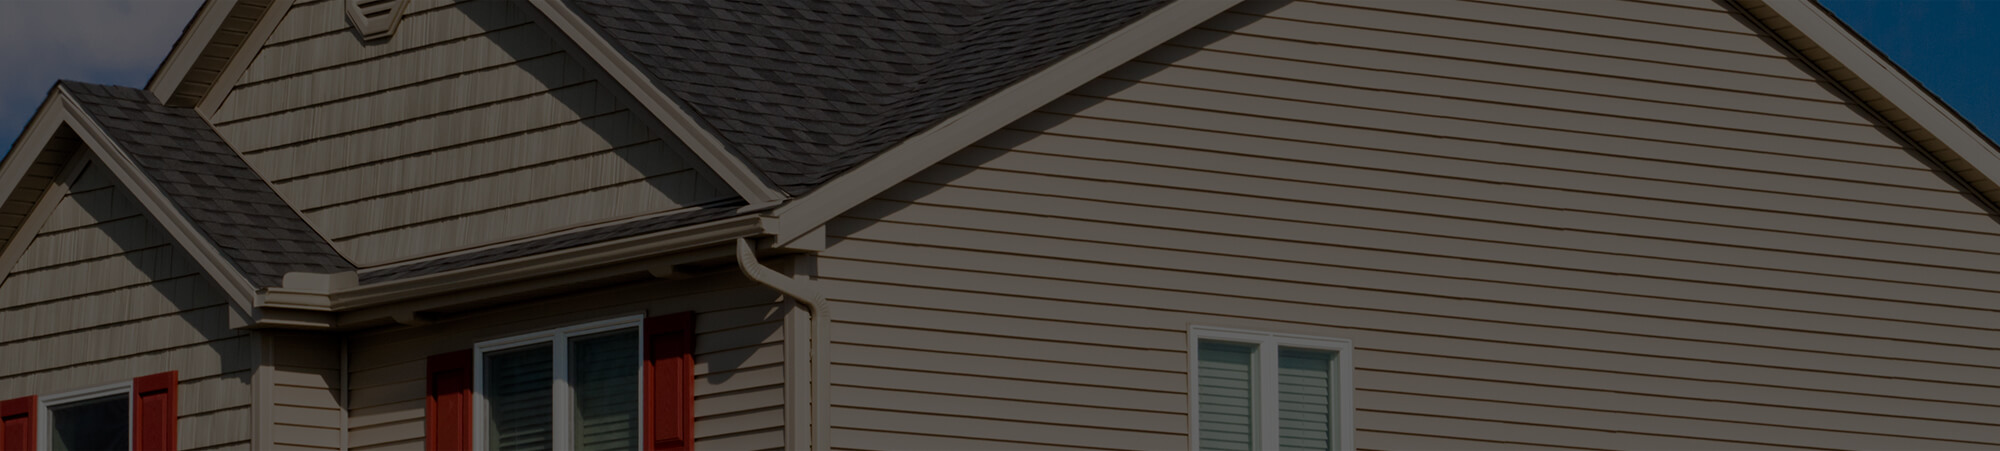 siding installation and replacement in allouez wi